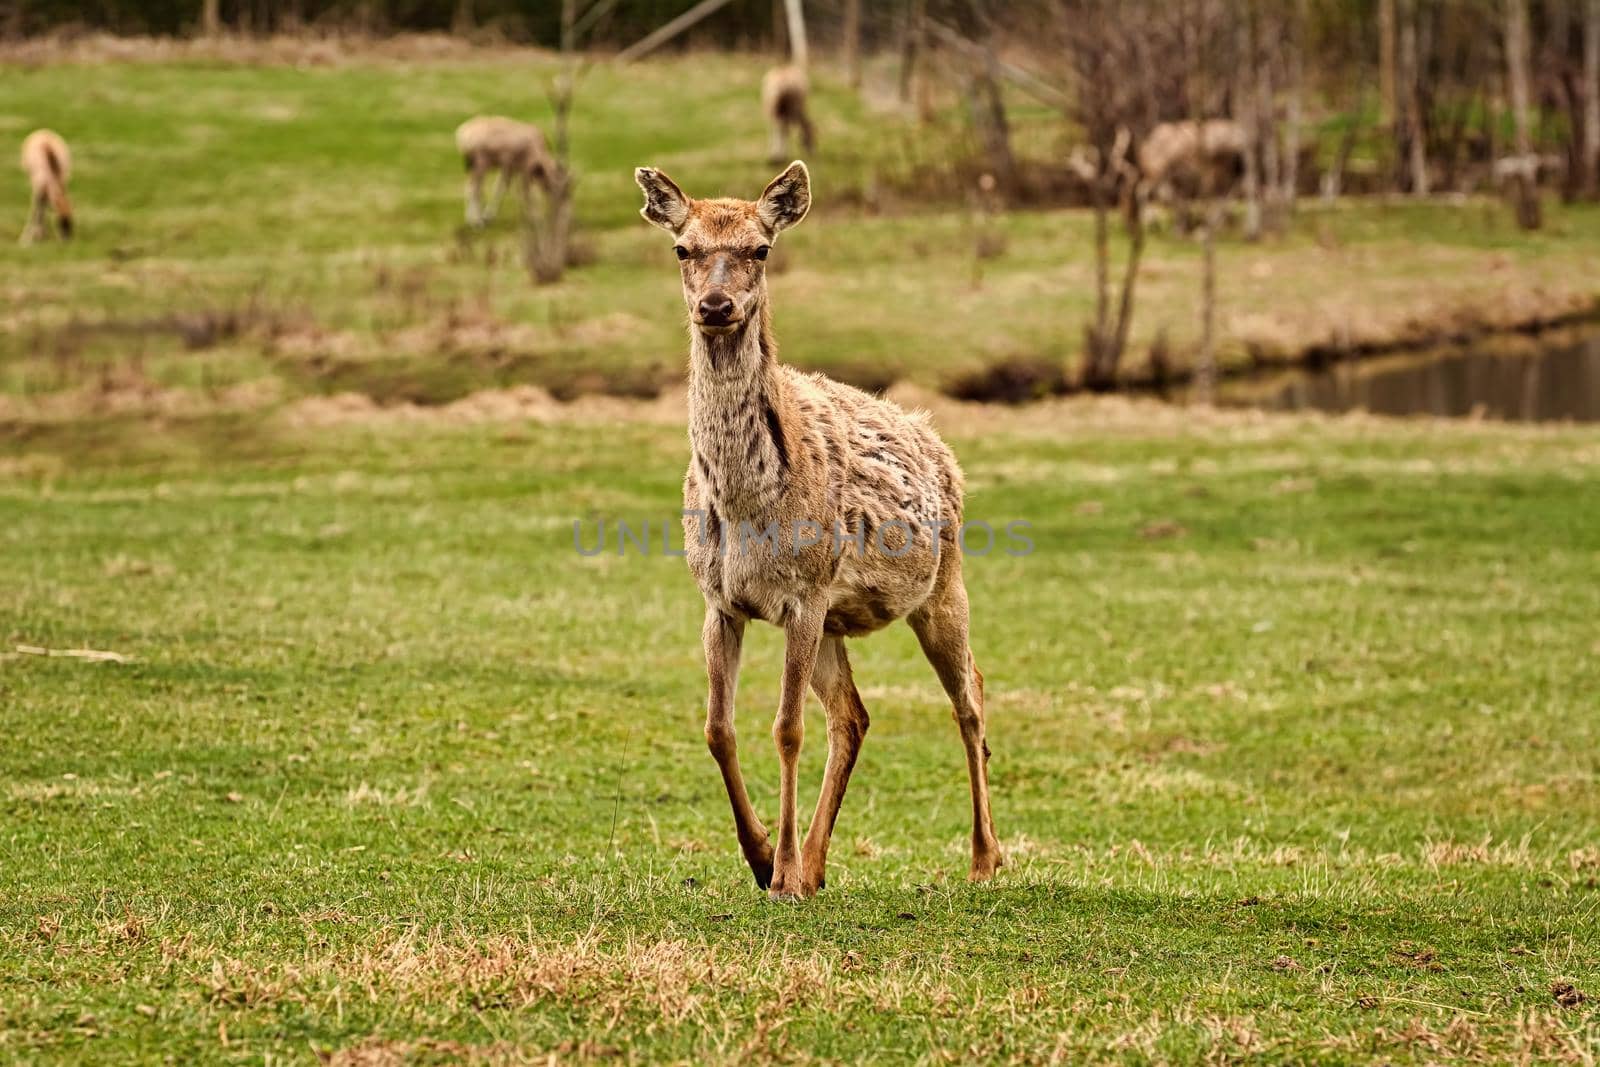 Deer on the grass lawn